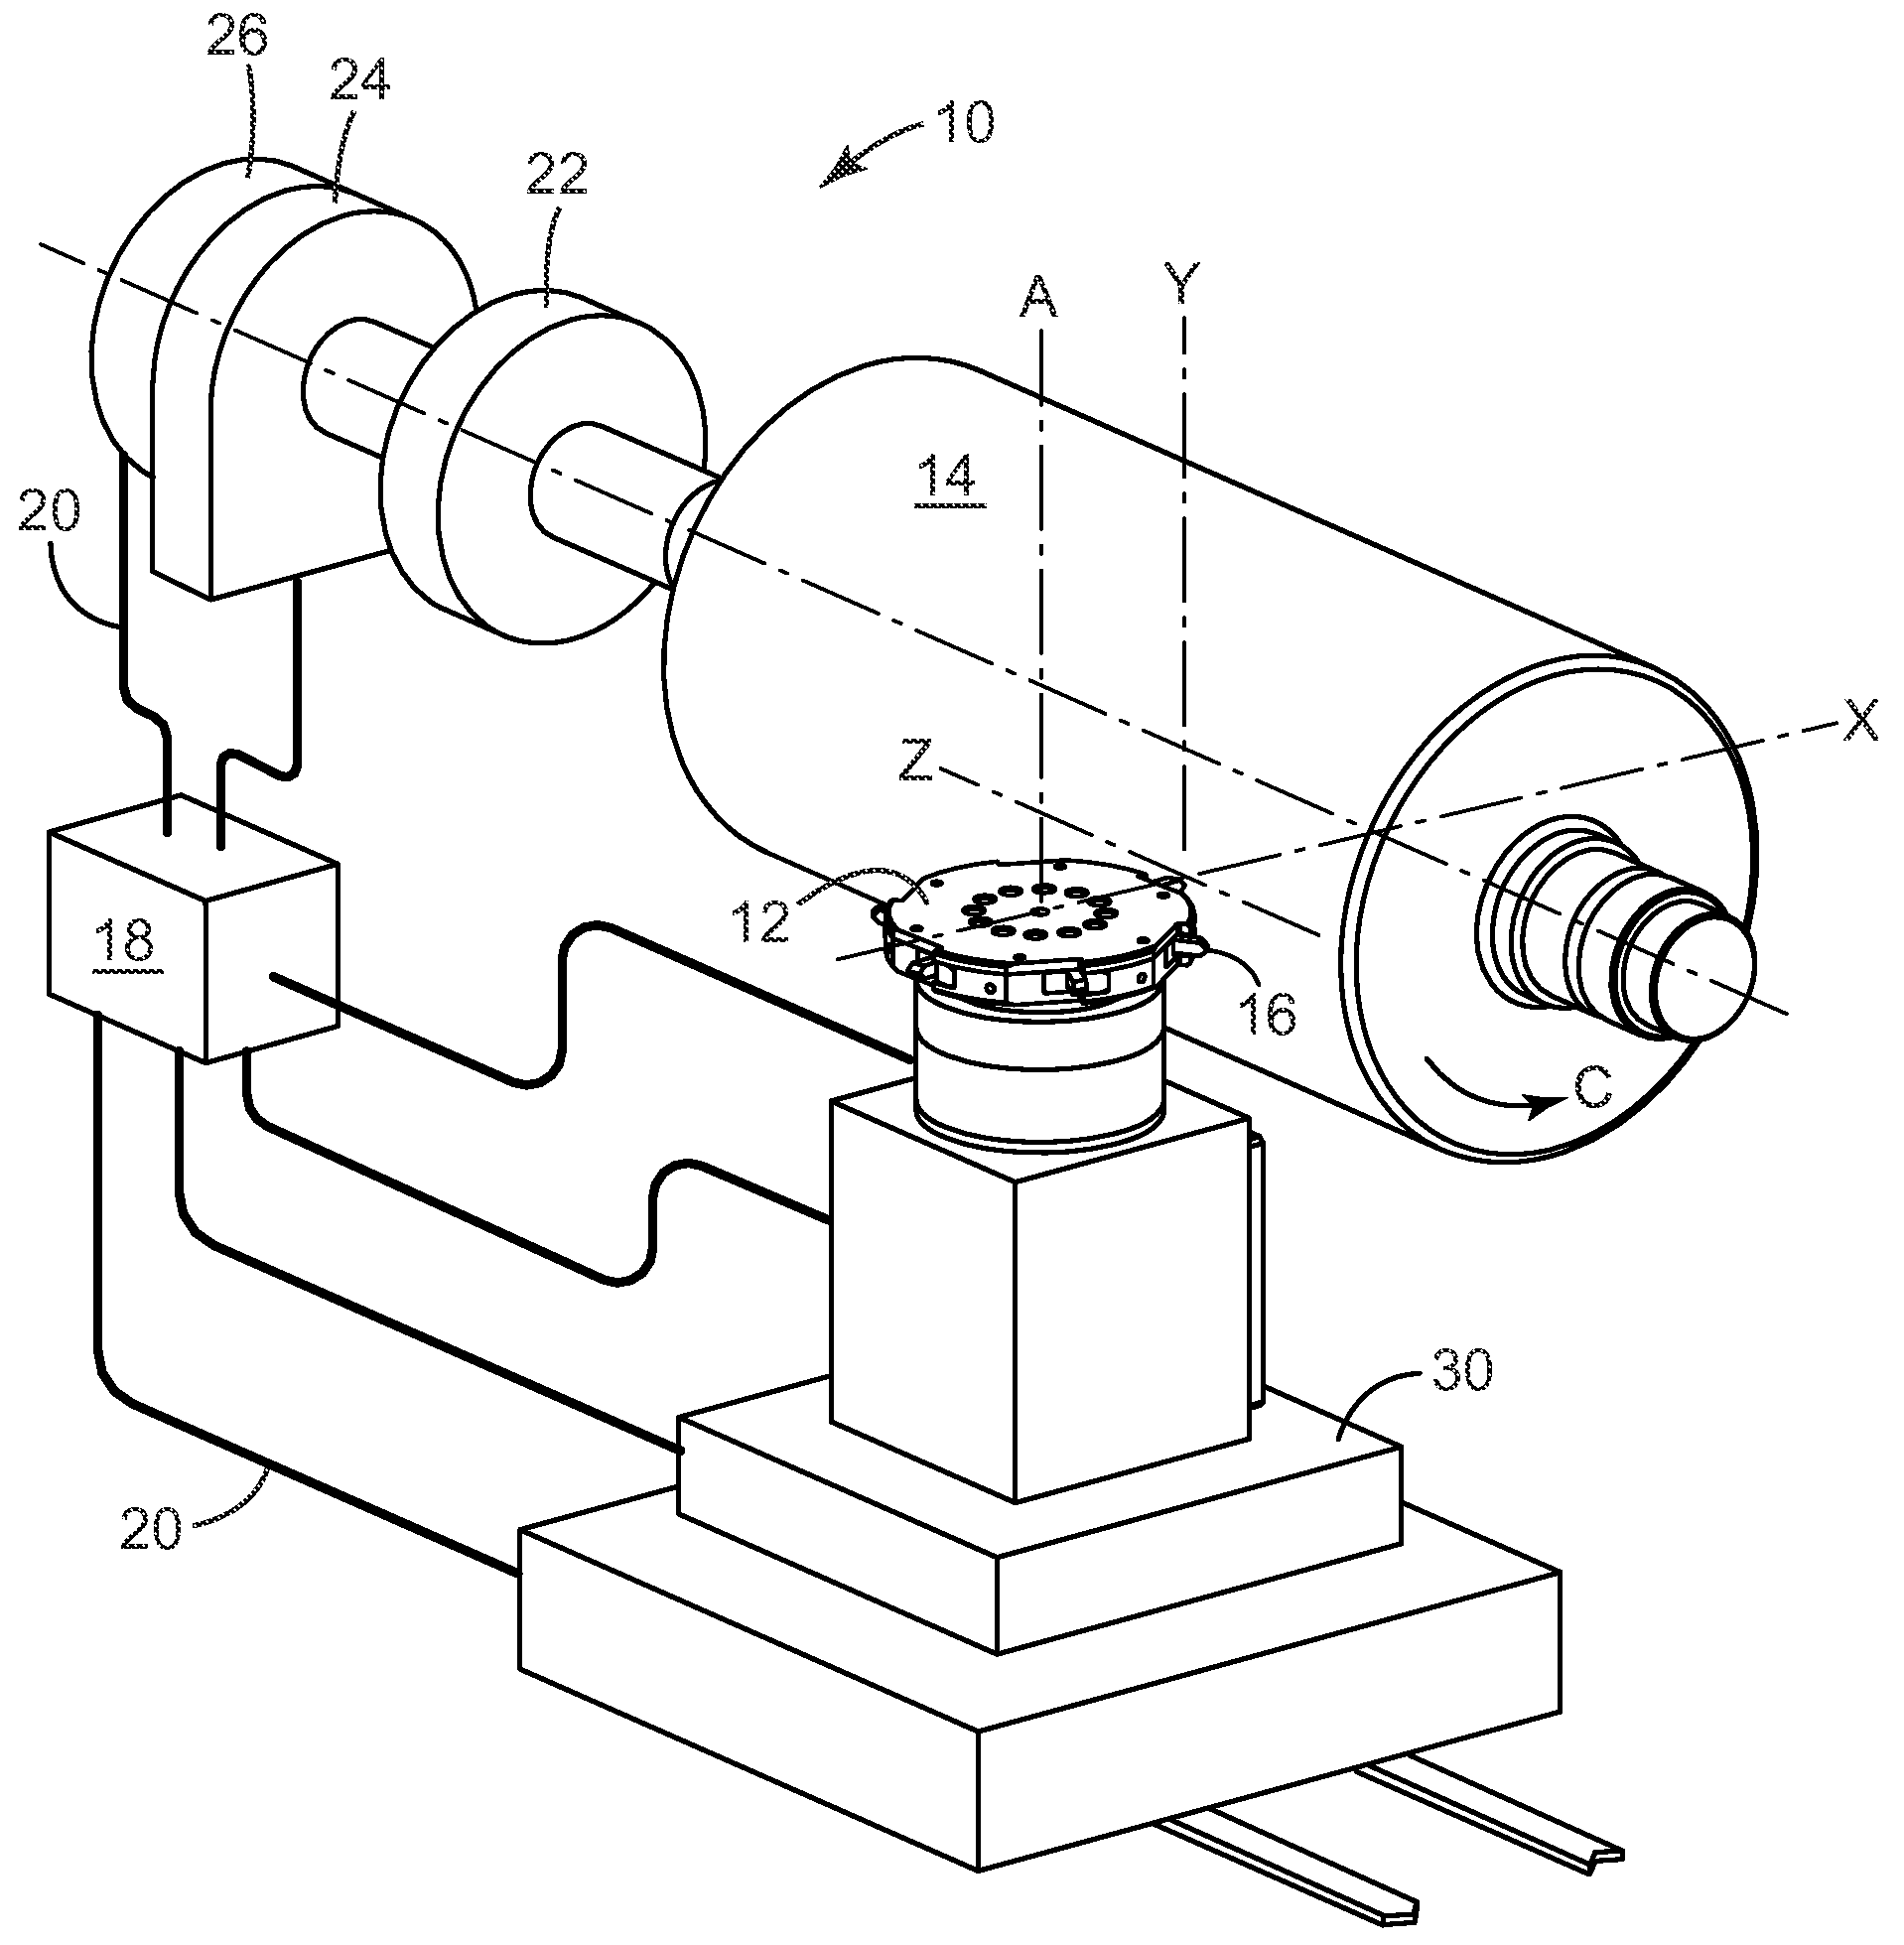 Fly-cutting head, system and method, and tooling and sheeting produced therewith